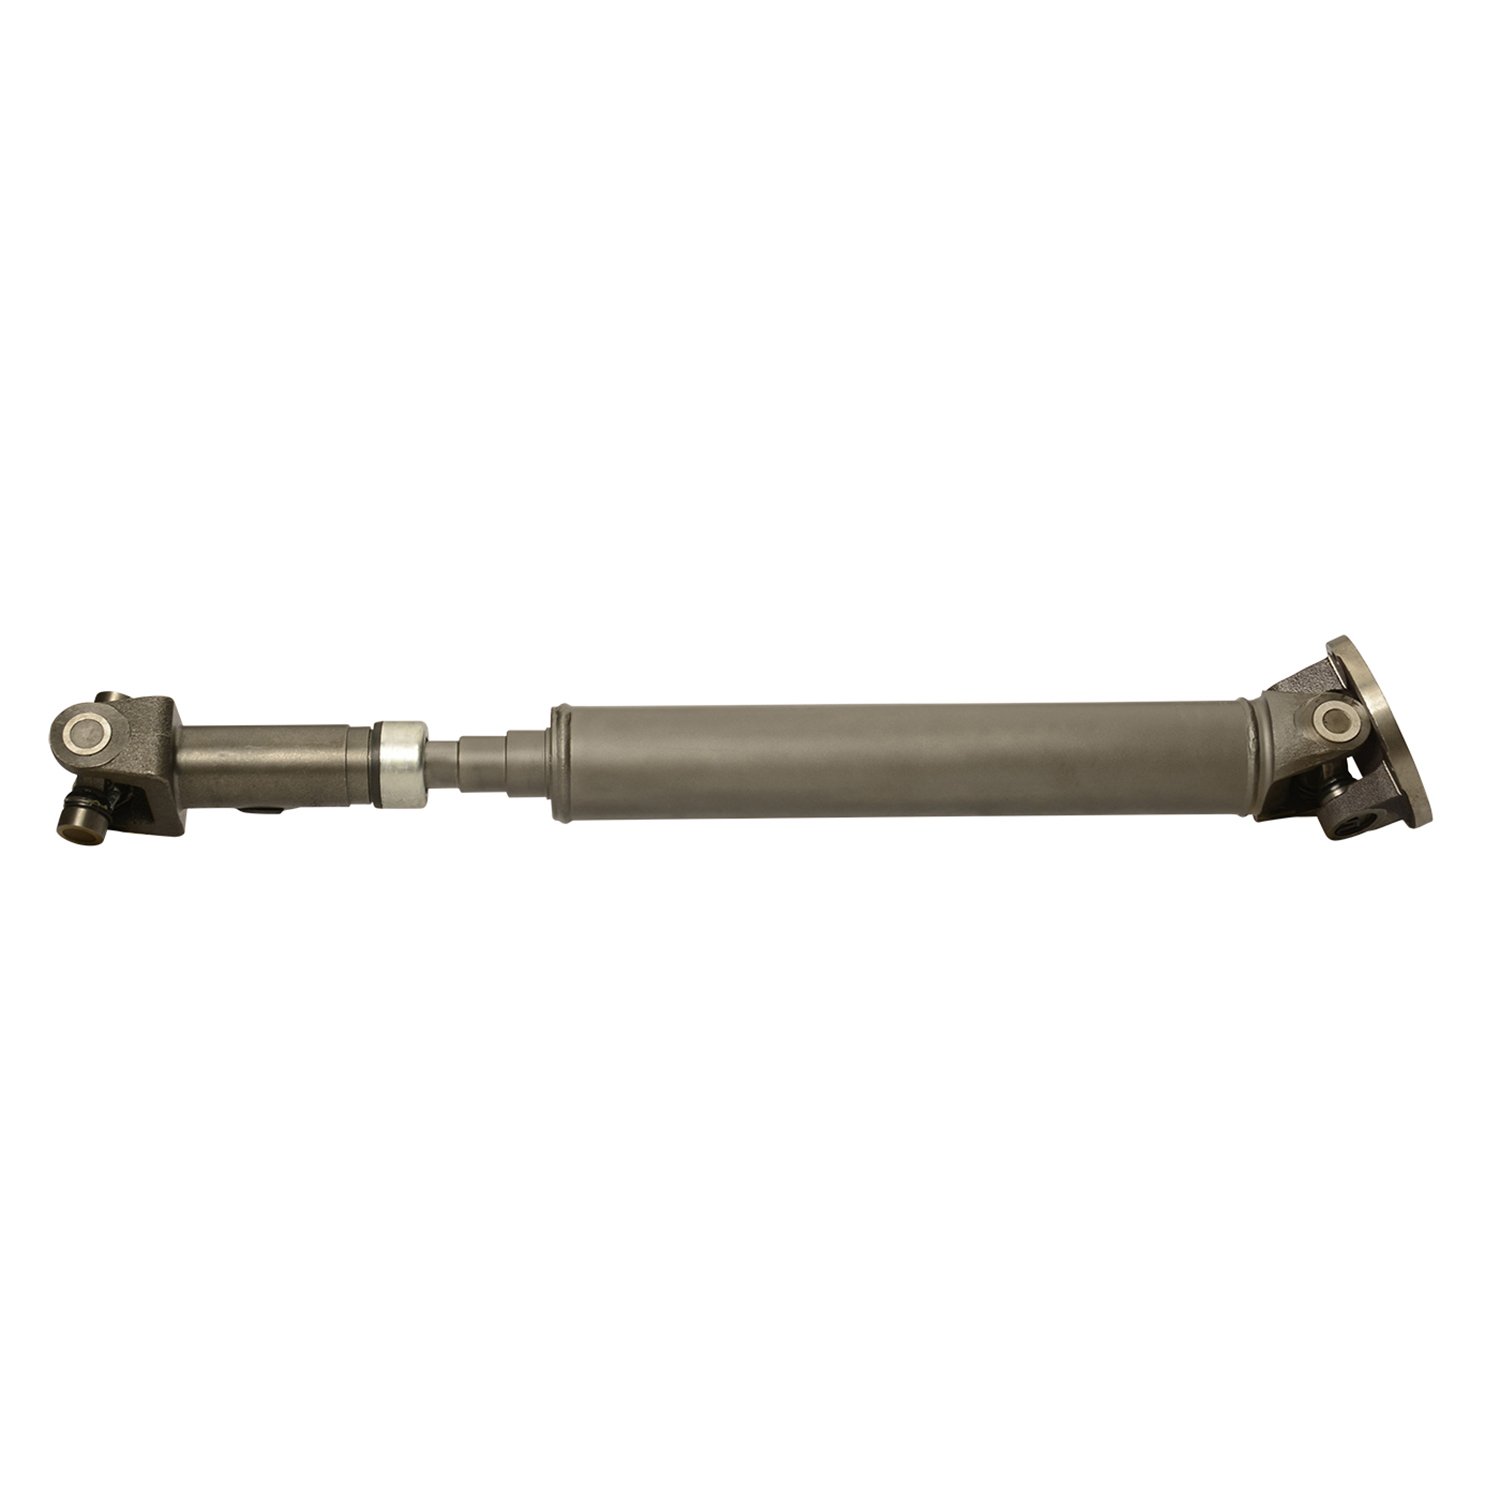 USA Standard ZDS9348 Front Driveshaft, For GM Truck & Suv, 28-3/4 in. Center-To-Center